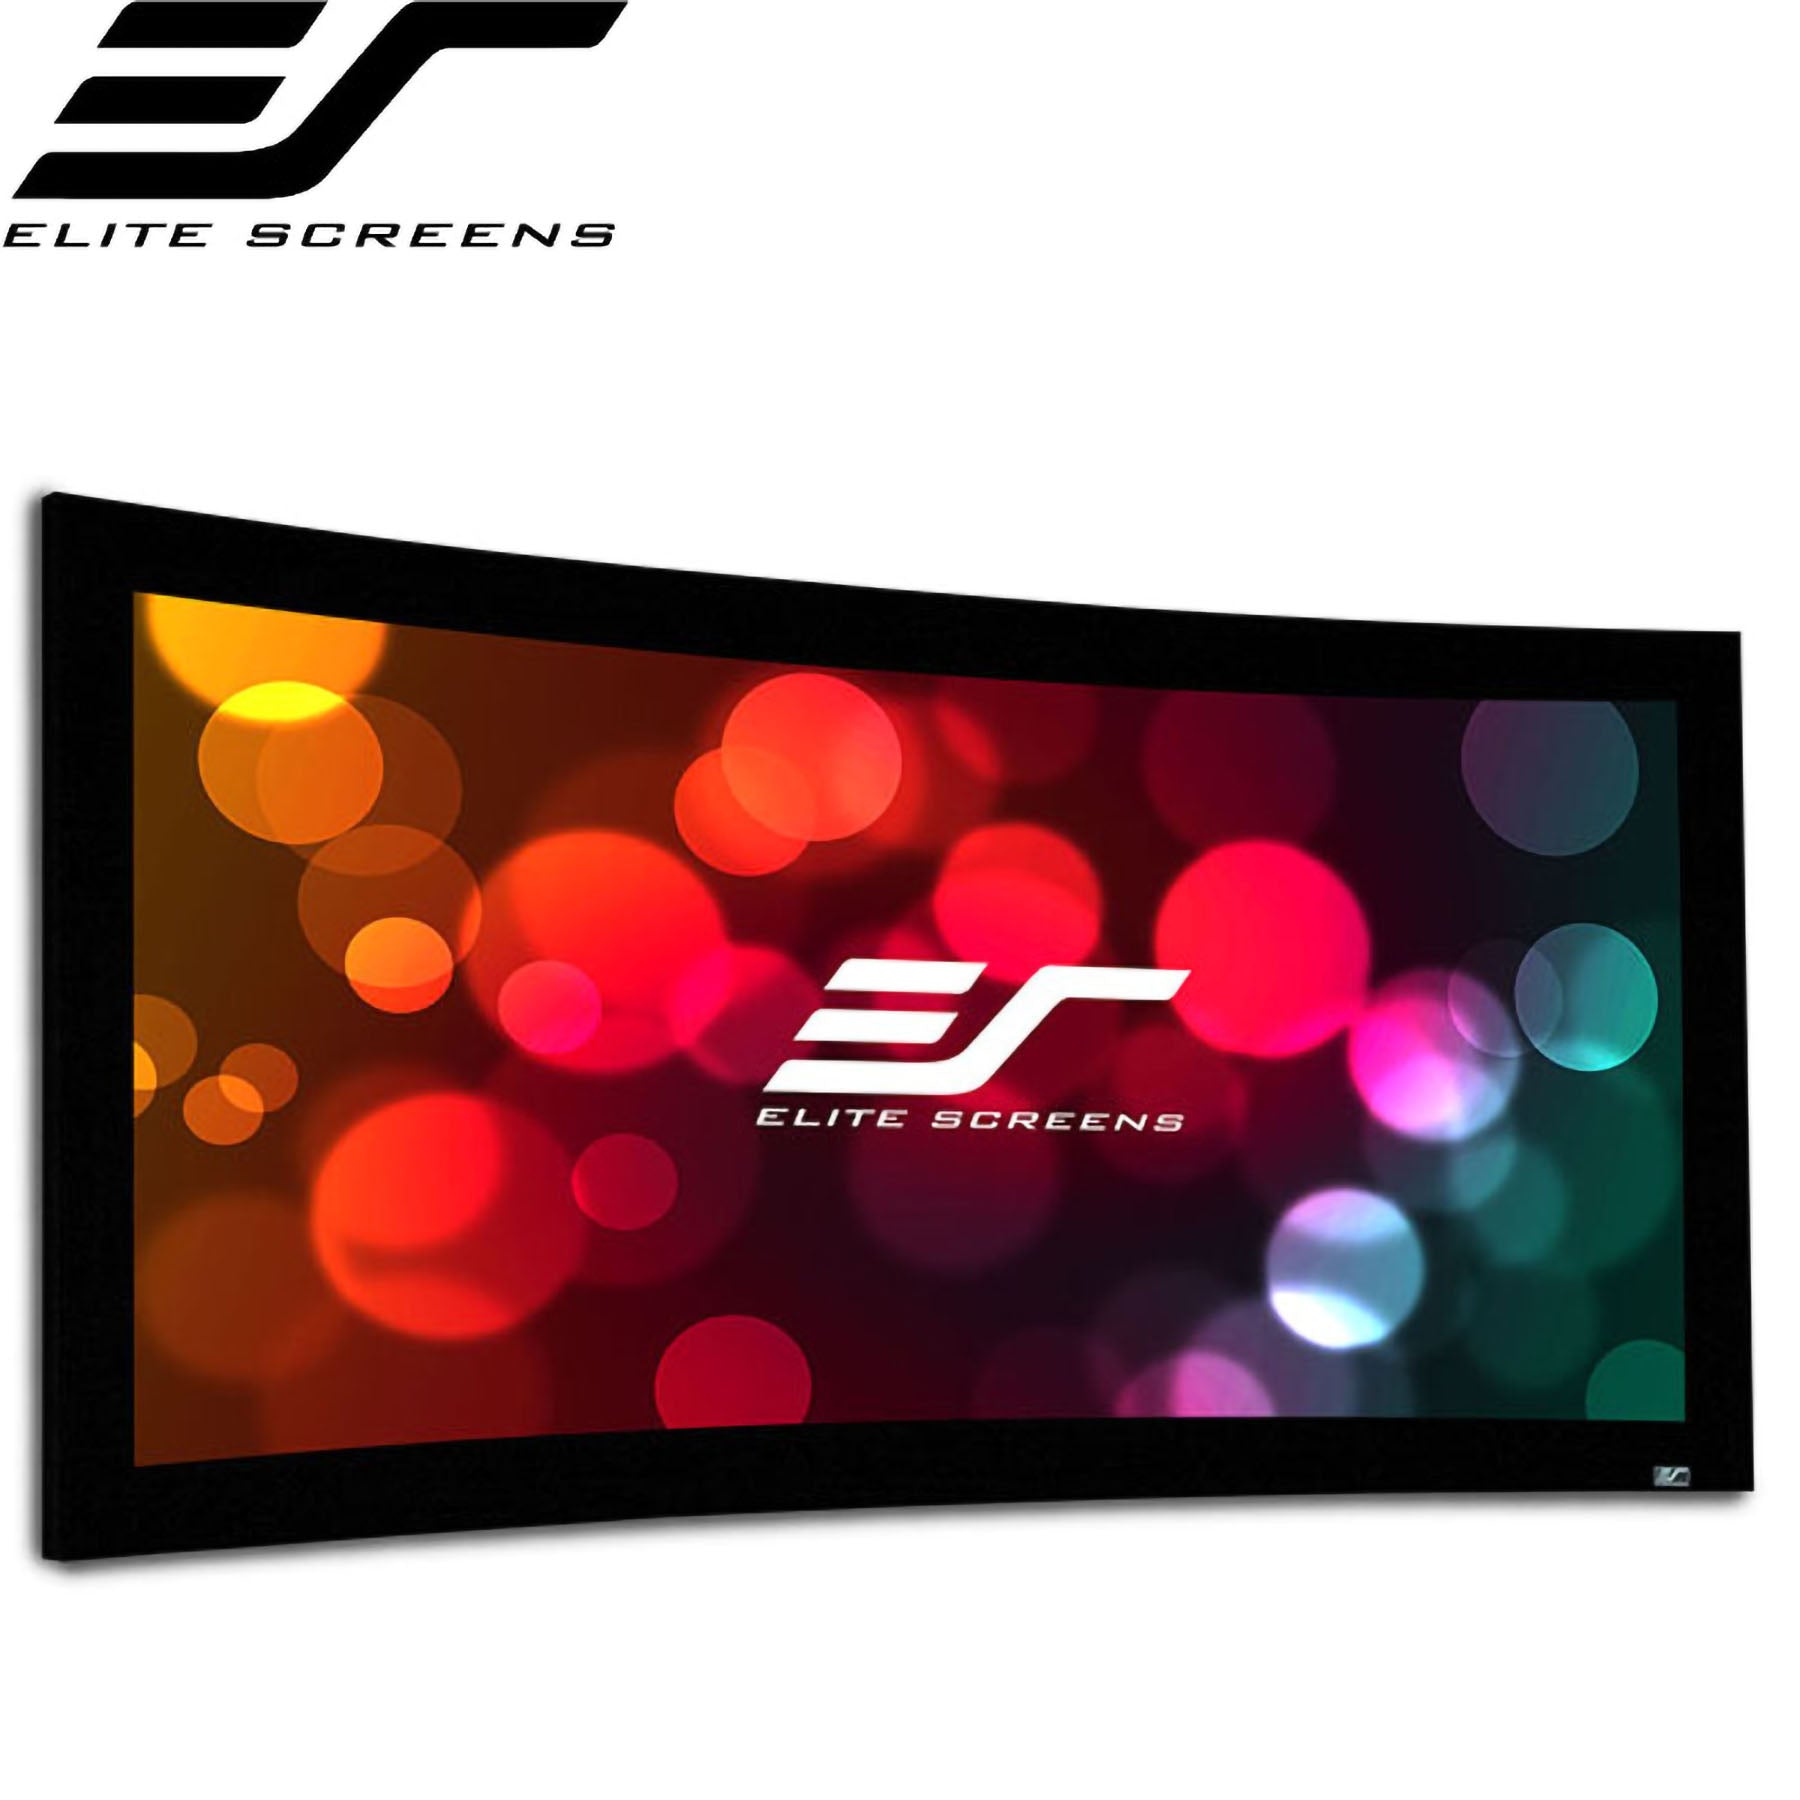 Elite Screens Curve235-158A4K 158" Lunette115 Acoustic 4K Cinemascope 2.35:1 Curved Fixed Frame